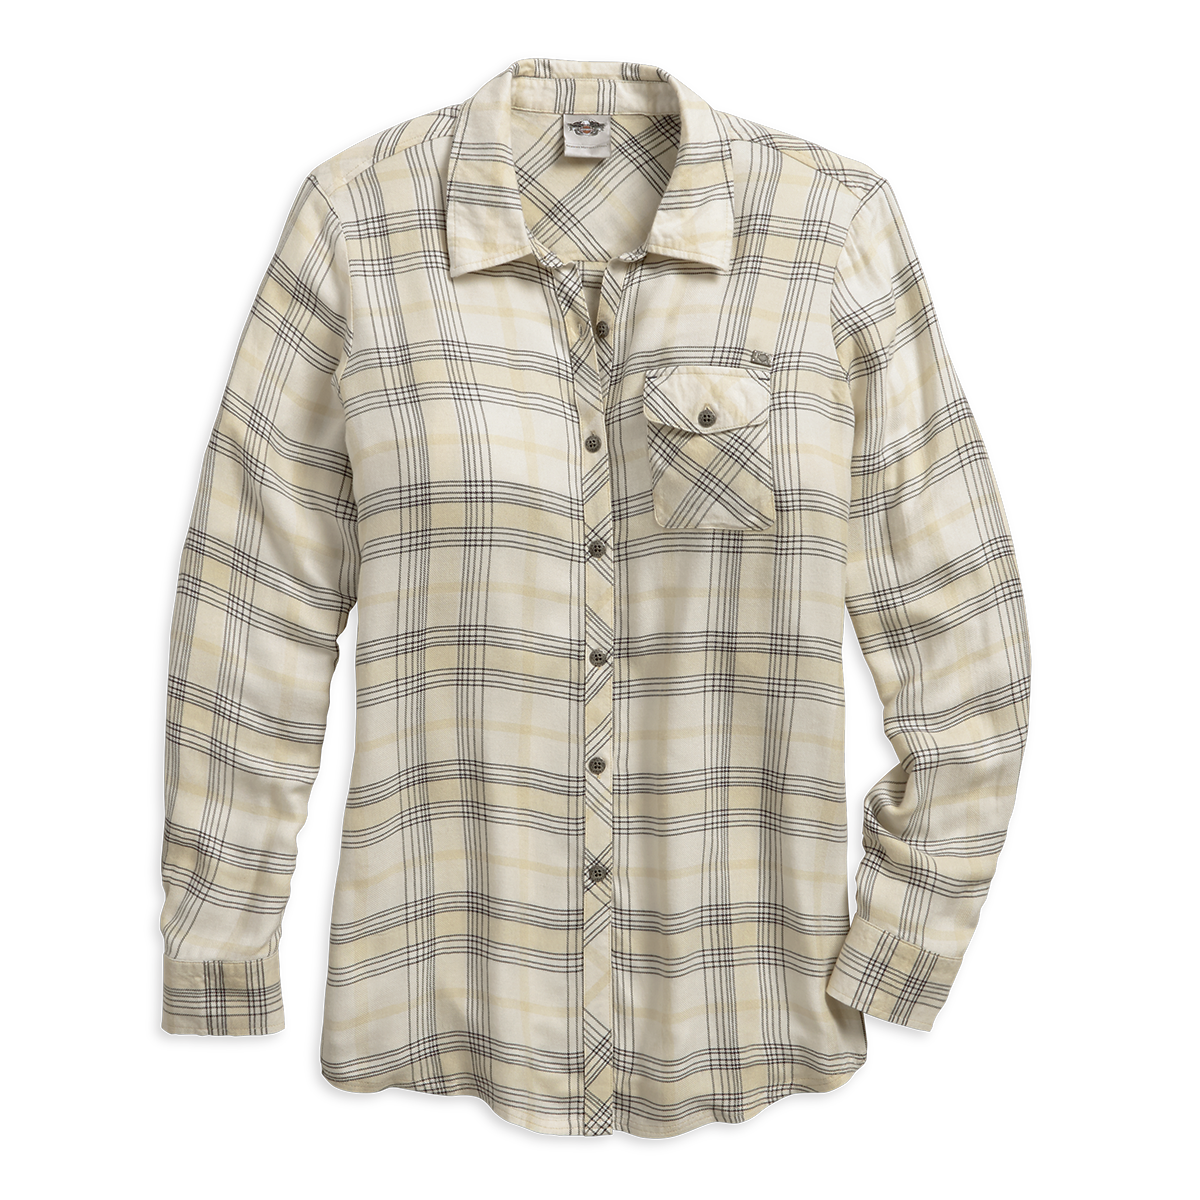 Harley-Davidson Relaxed Fit Plaid Women's Shirt